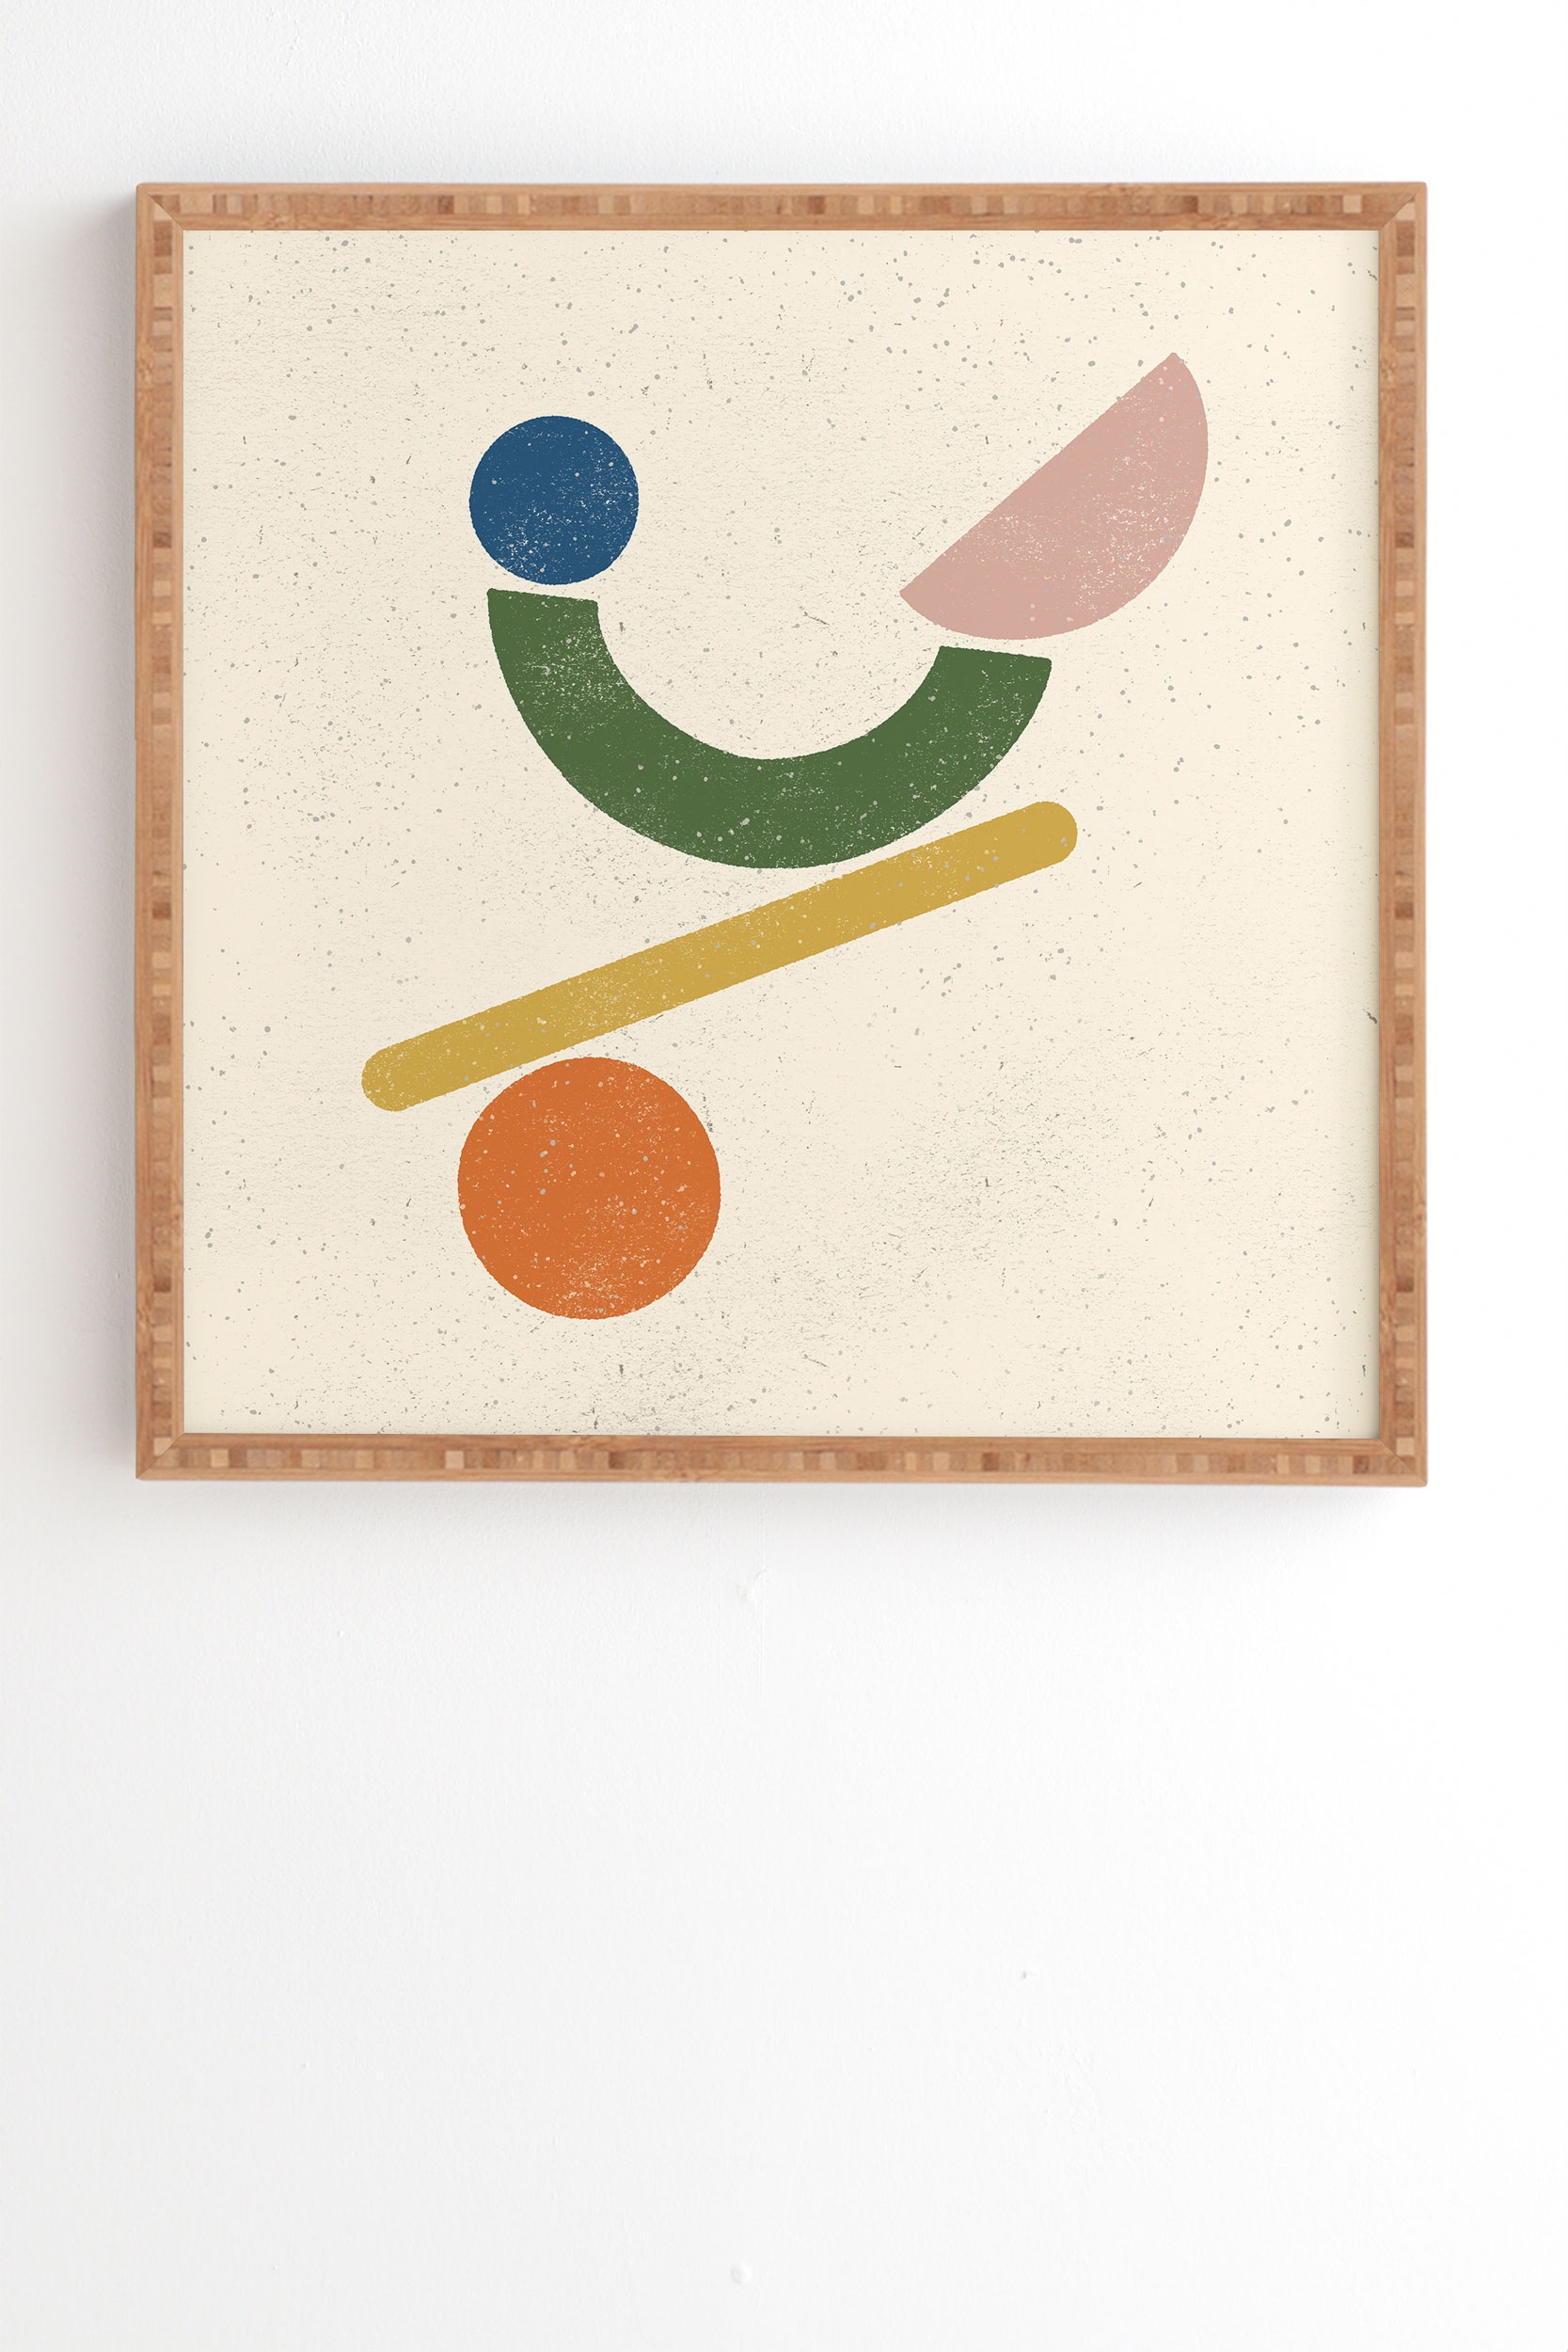 Balance Shapes by Pauline Stanley - Framed Wall Art Bamboo 19" x 22.4" - Image 1